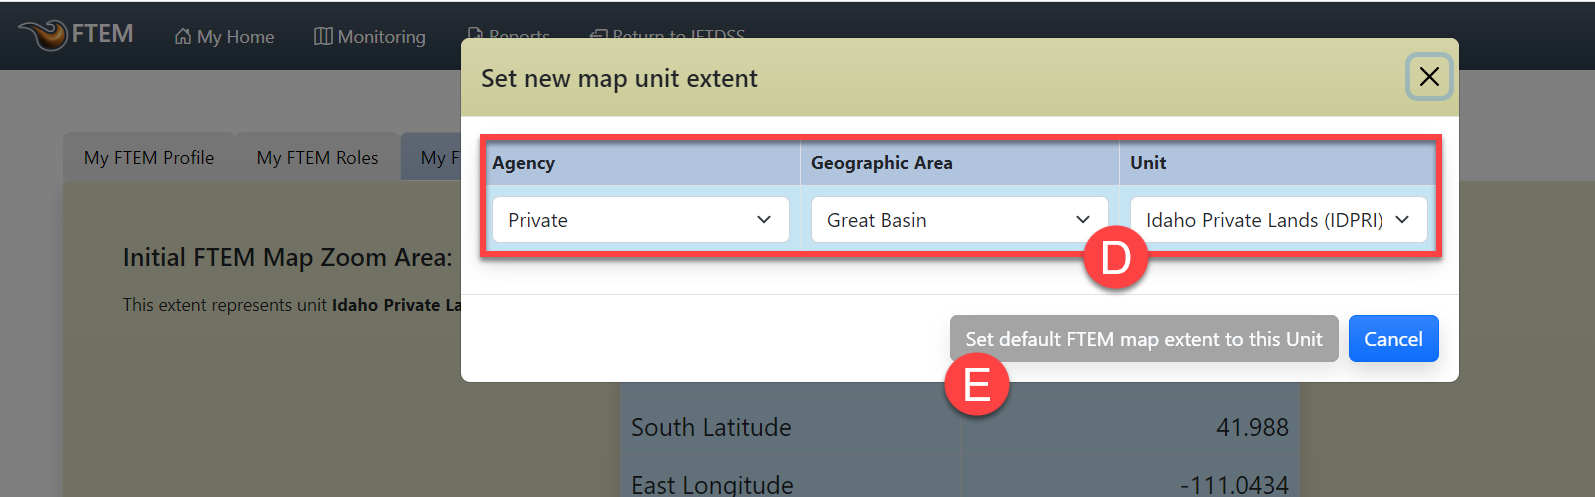 select your desired agency and location from the dropdown menu